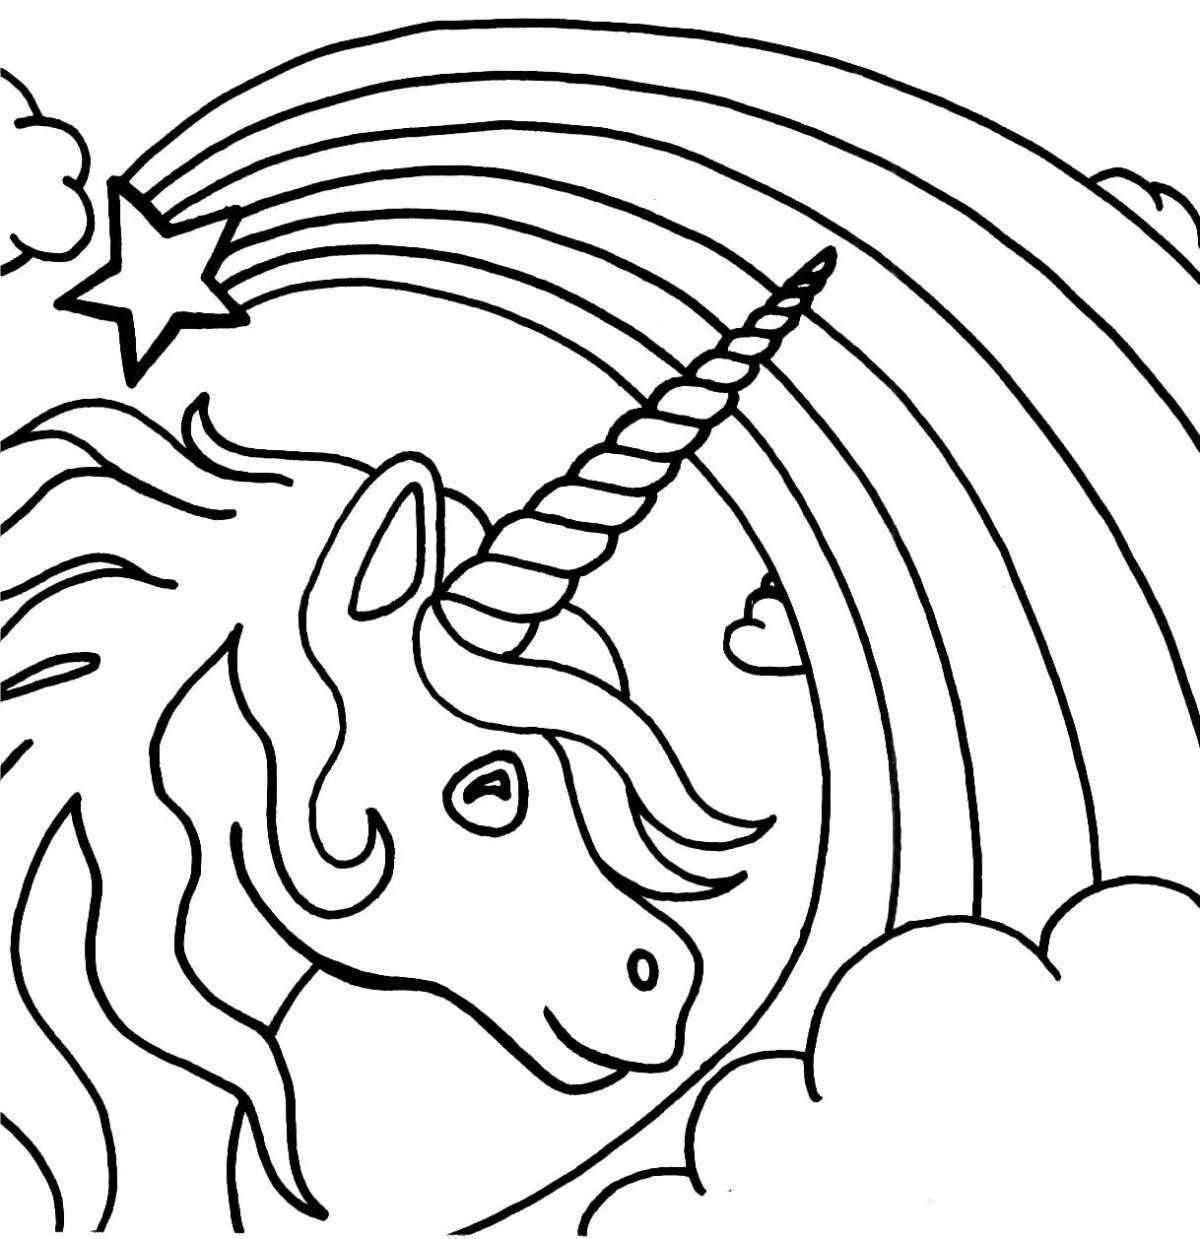 Greatly detailed unicorn coloring page